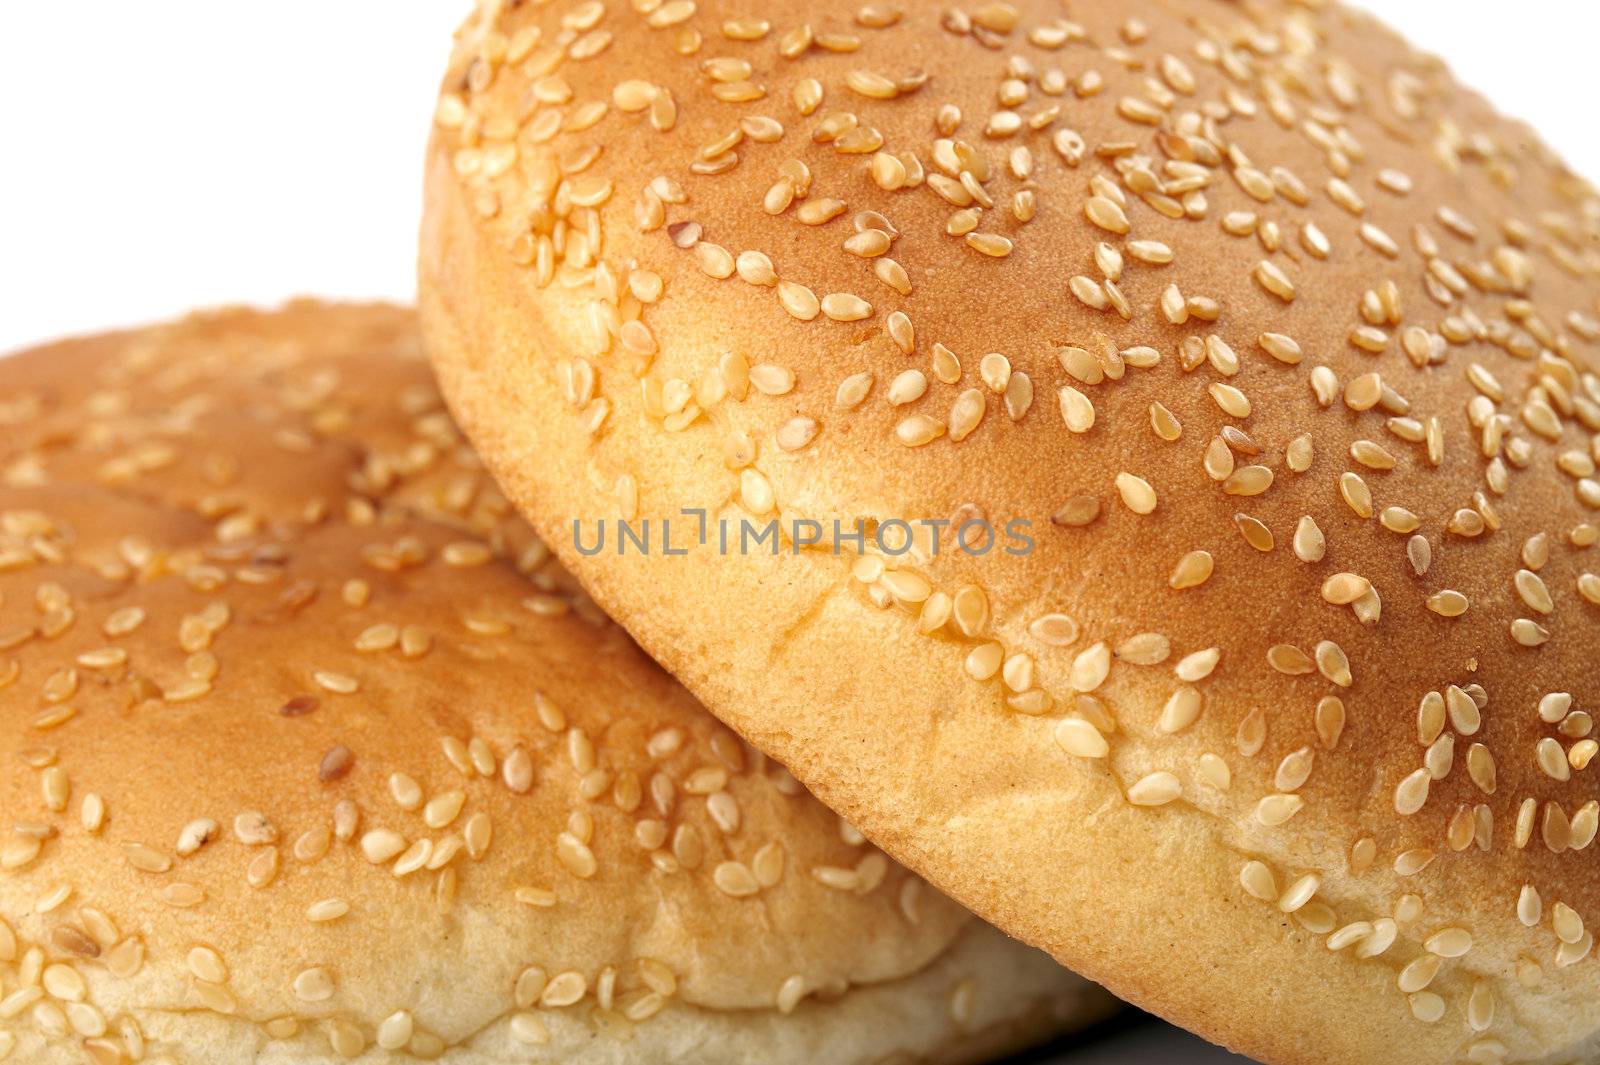 Closeup of two appetizing fresh burger buns on white background